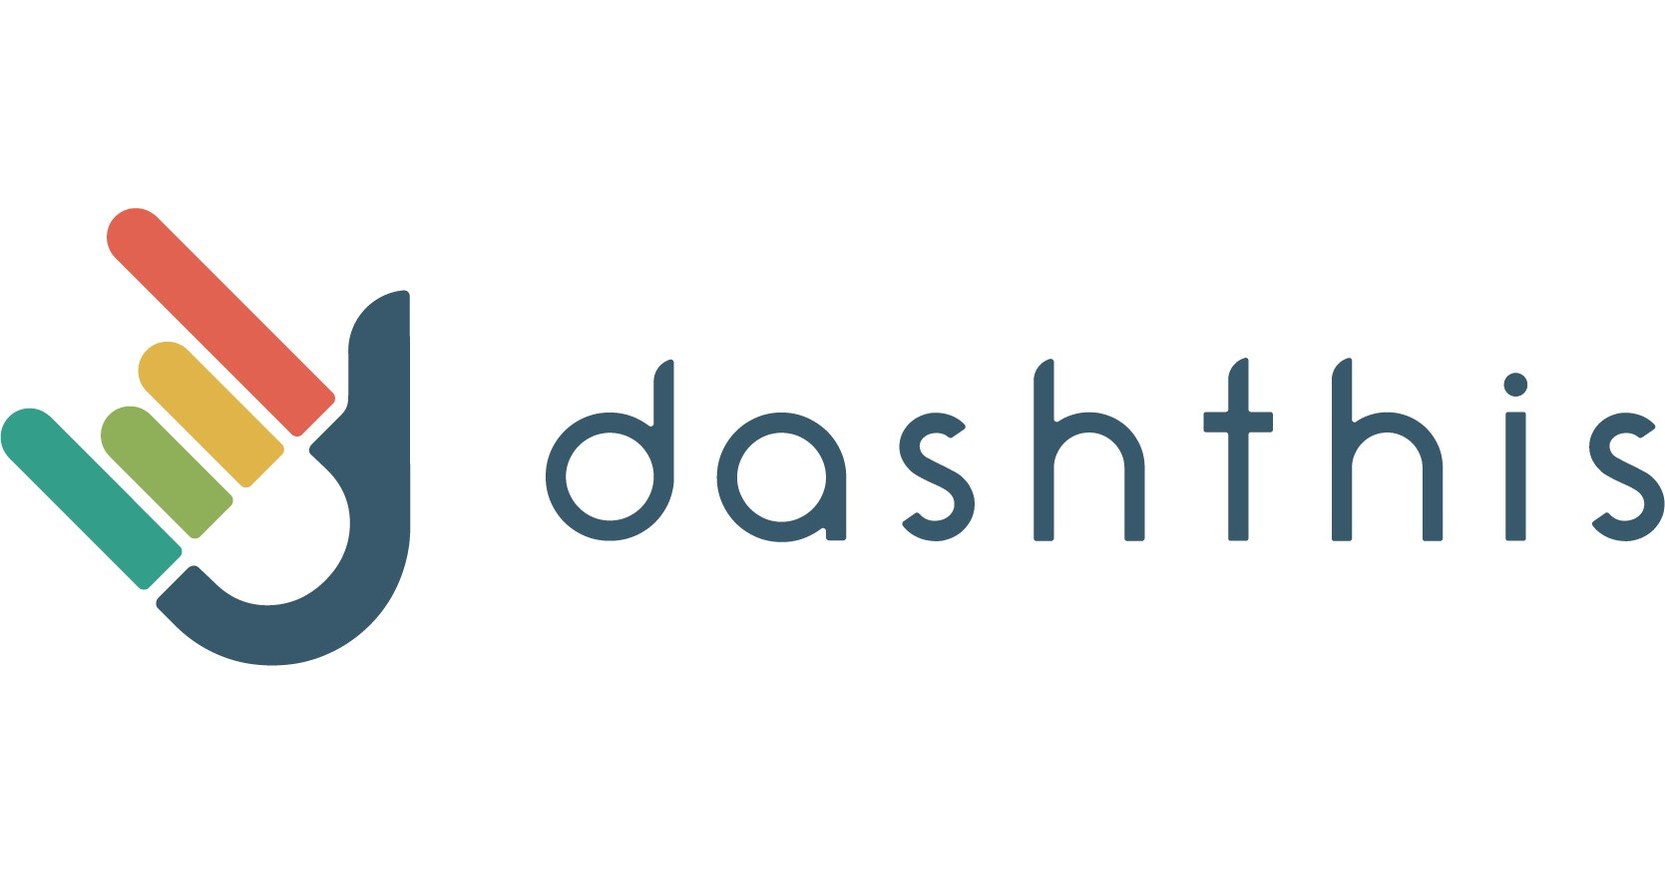 Impressive 1,302% growth ranks DashThis in the 2018 Growth 500 list